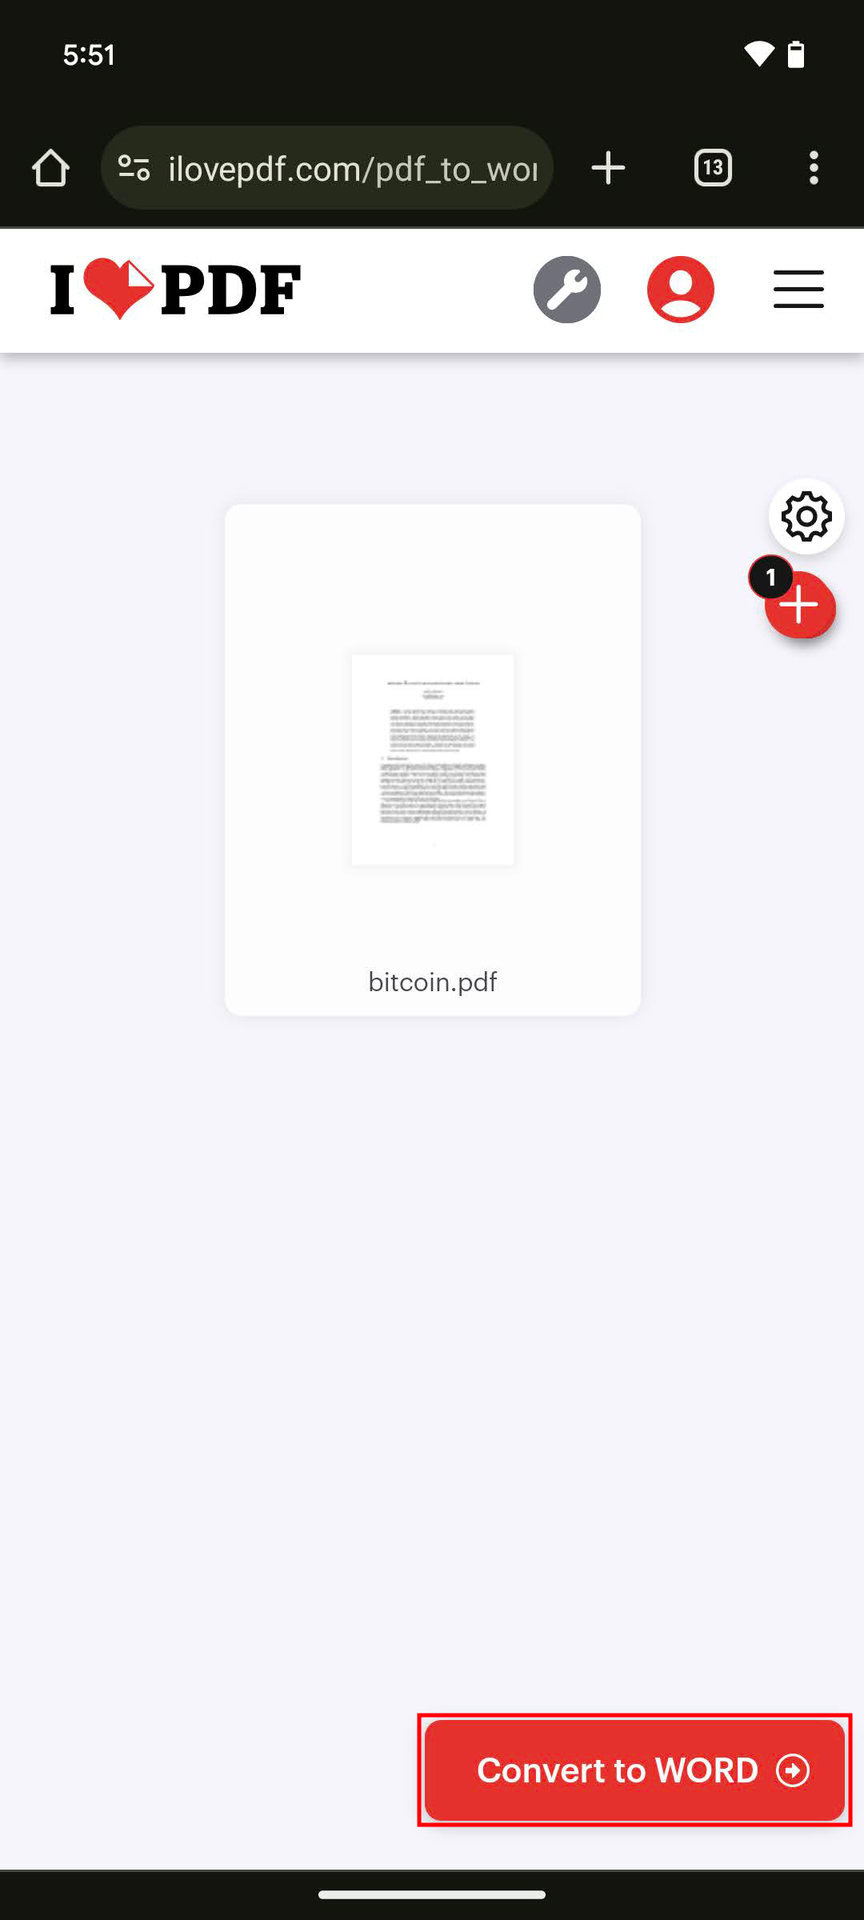 How to edit a PDF on Android without a paid Adobe subscription (2)